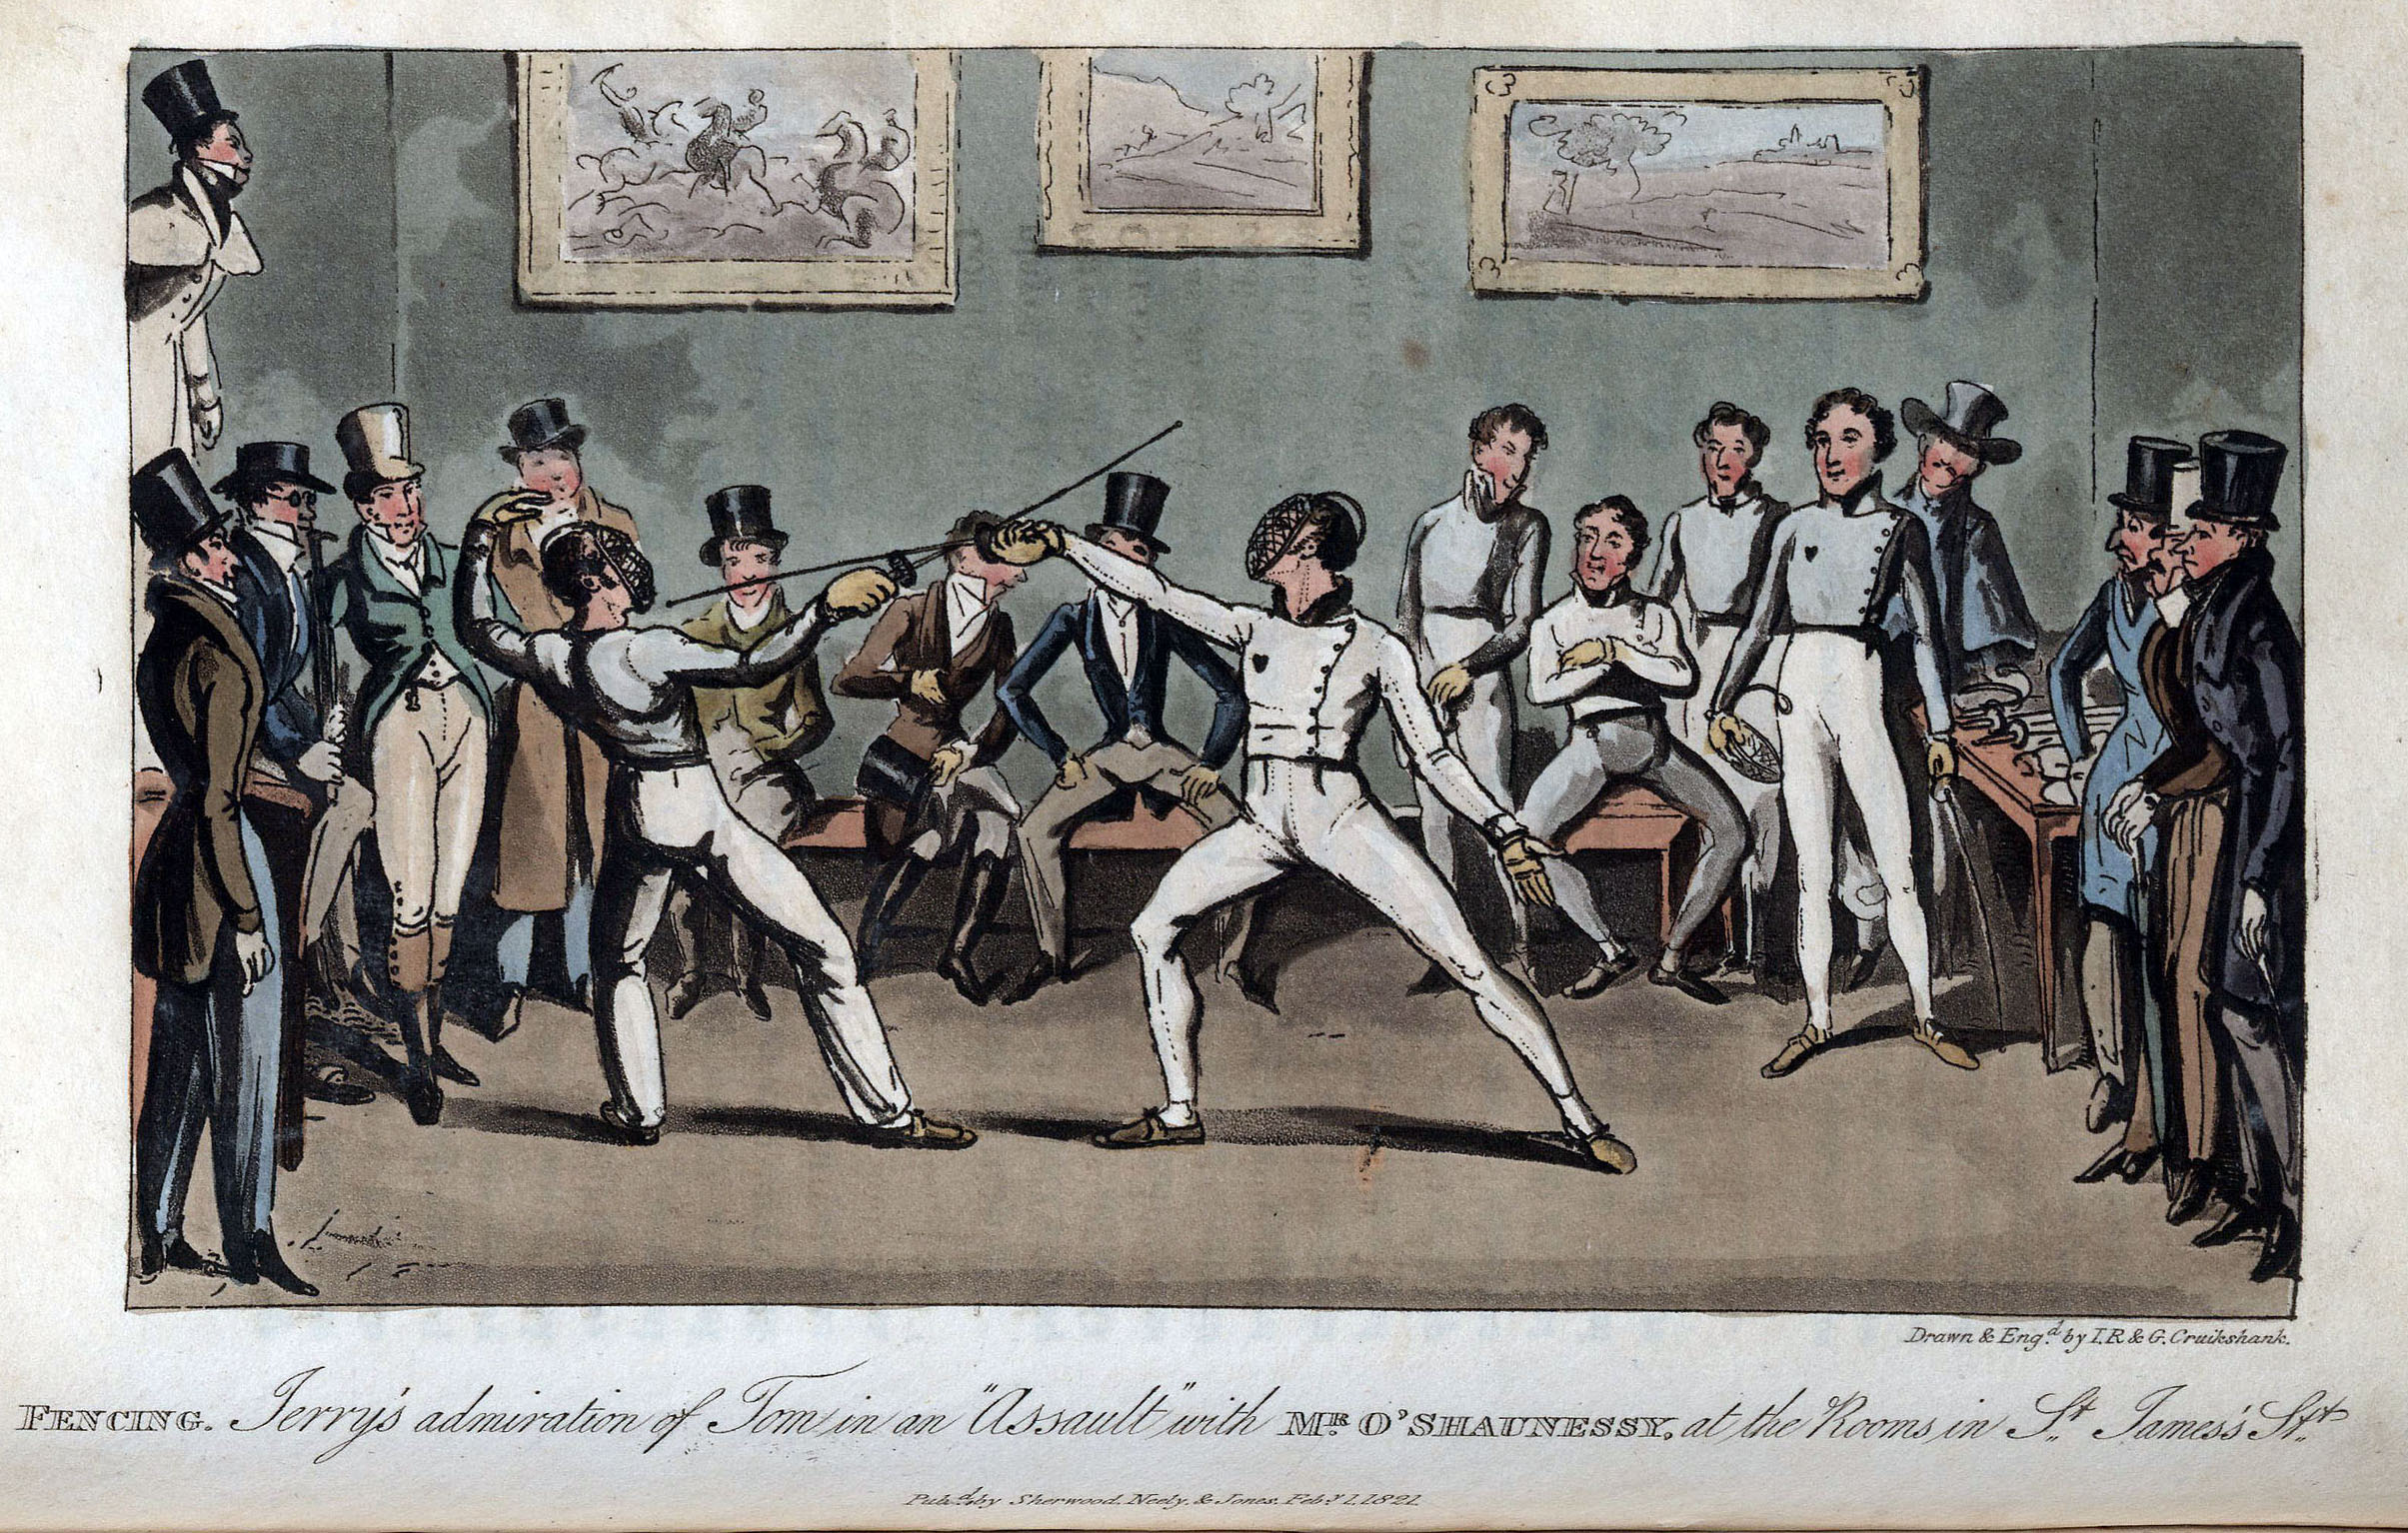 15 - Fencing - Jerry's admiration of Tom in an Assault with Mr O'Shaunessy, at the Rooms in St James's Srt